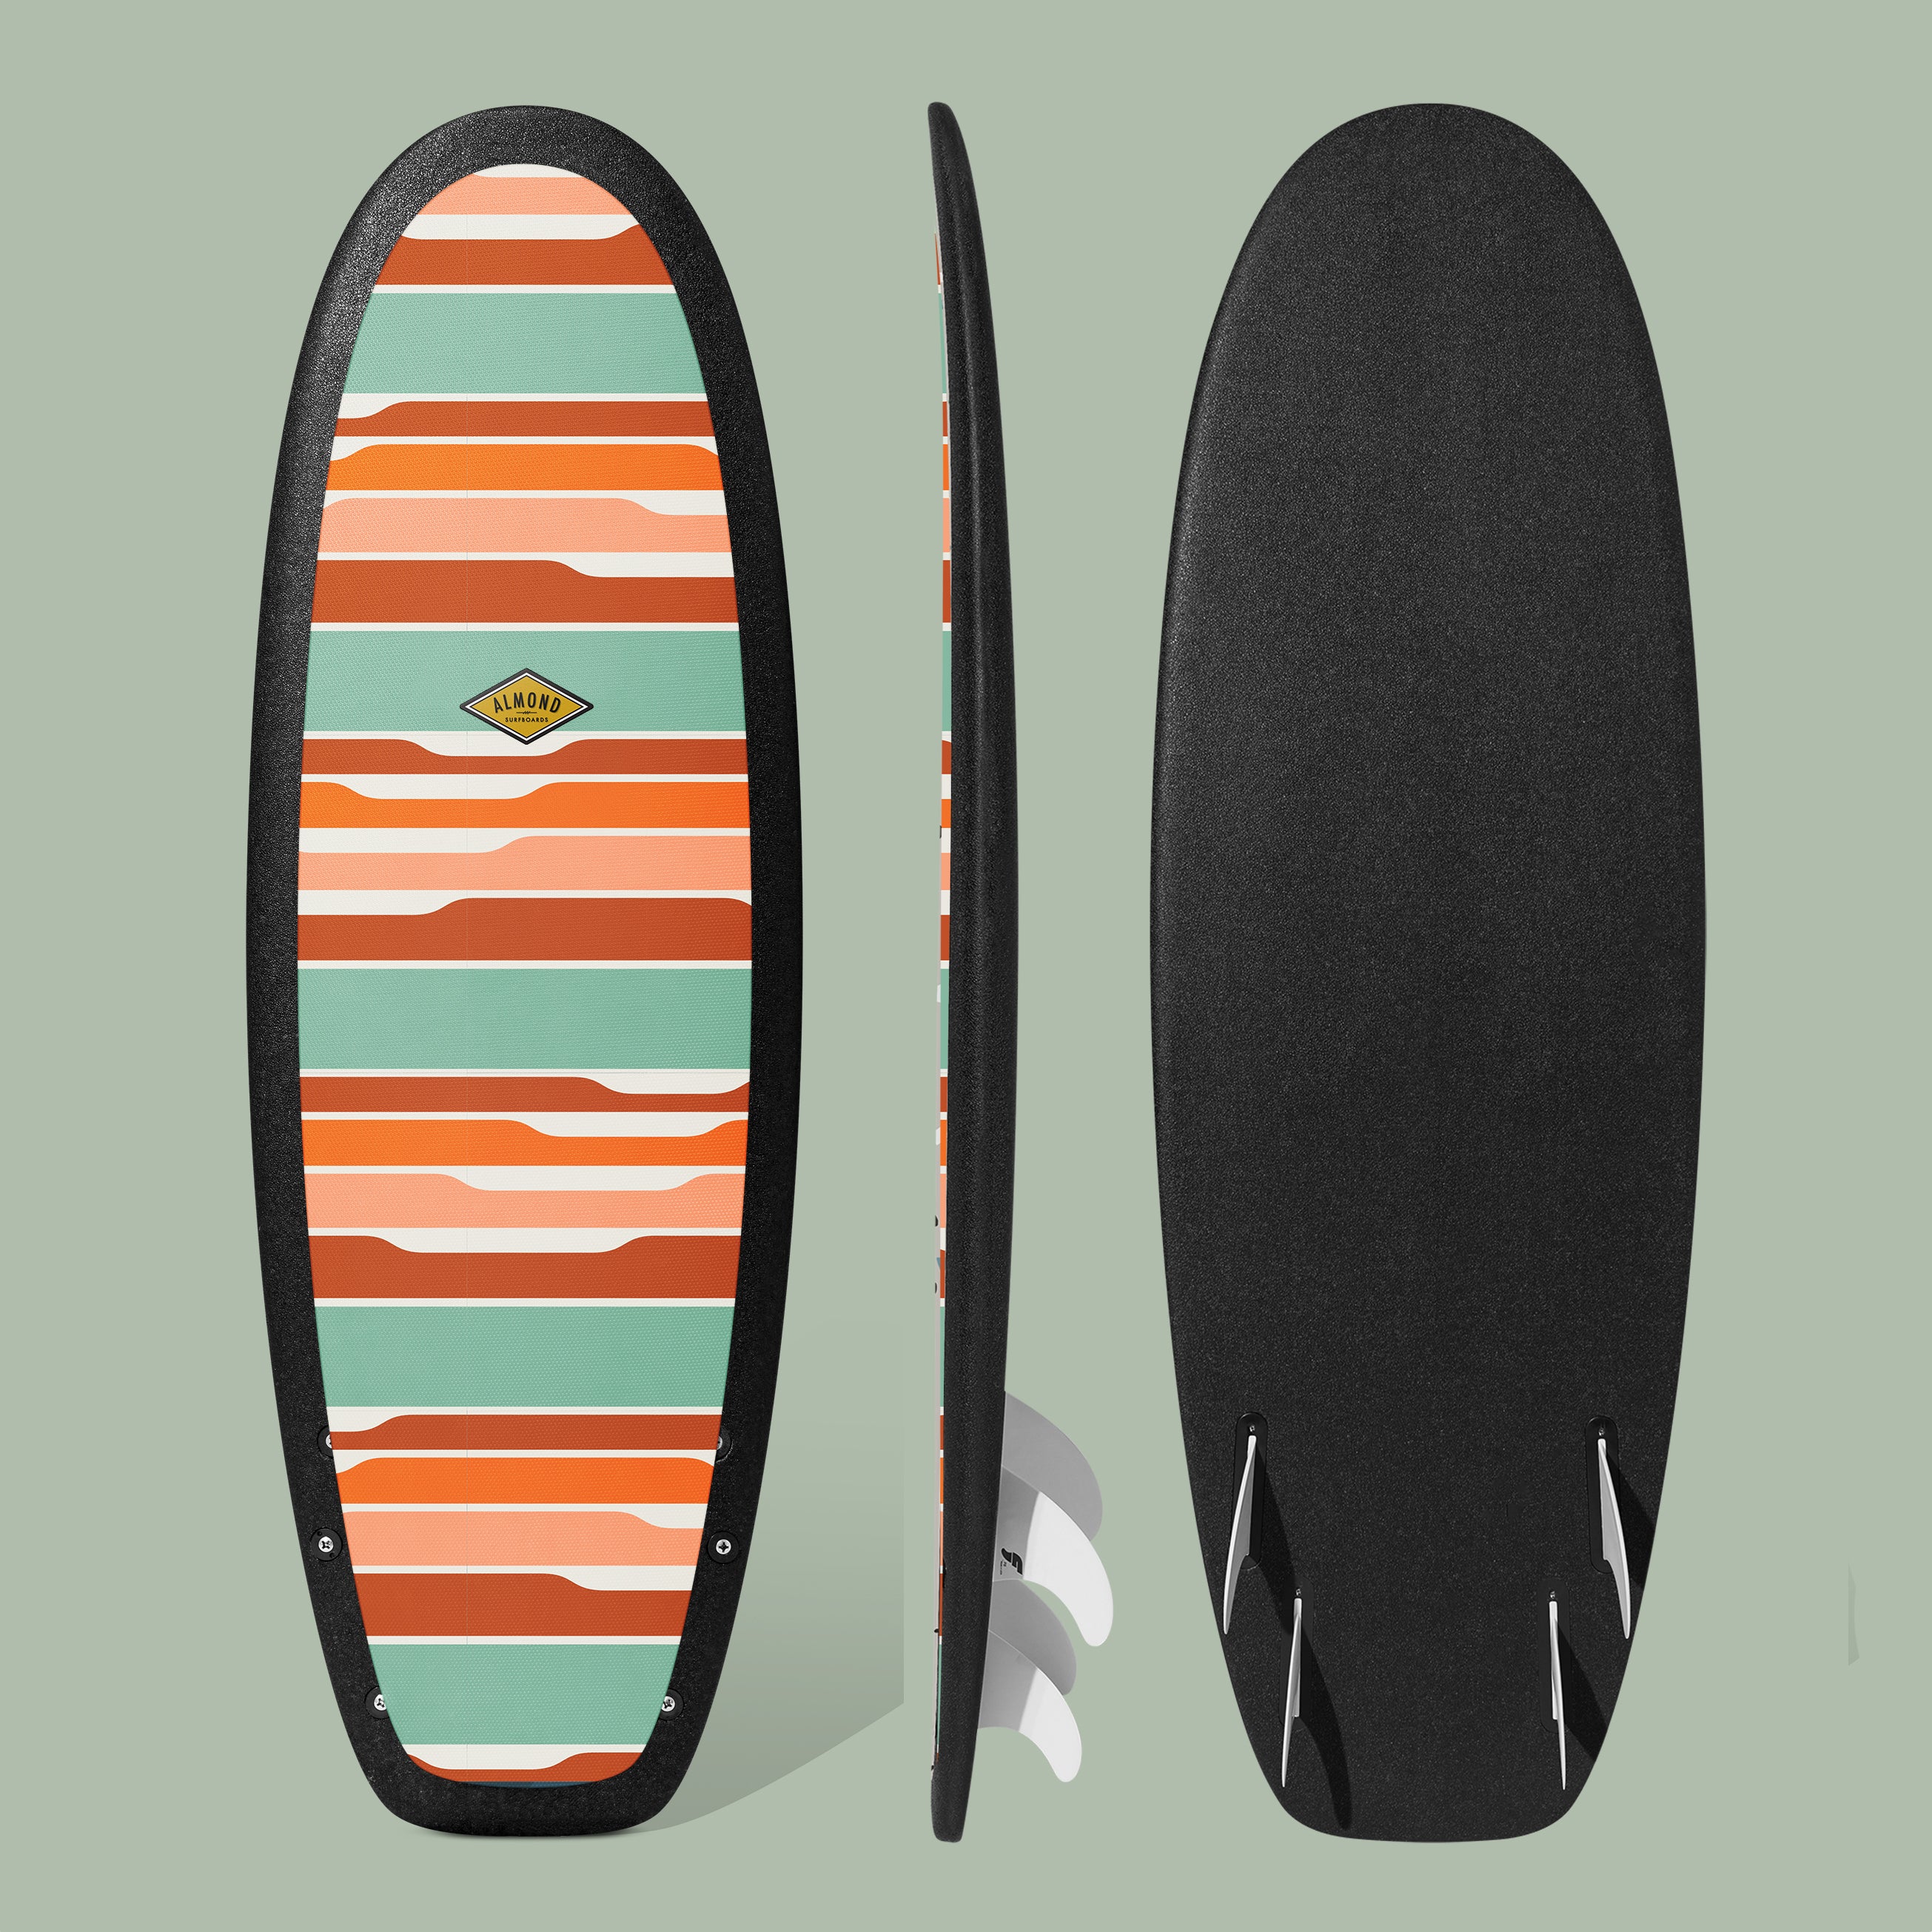 Front, Profile and back of a multicolored 5 foot 4 inch Almond Secret Menu surfboard with a logo on a green background